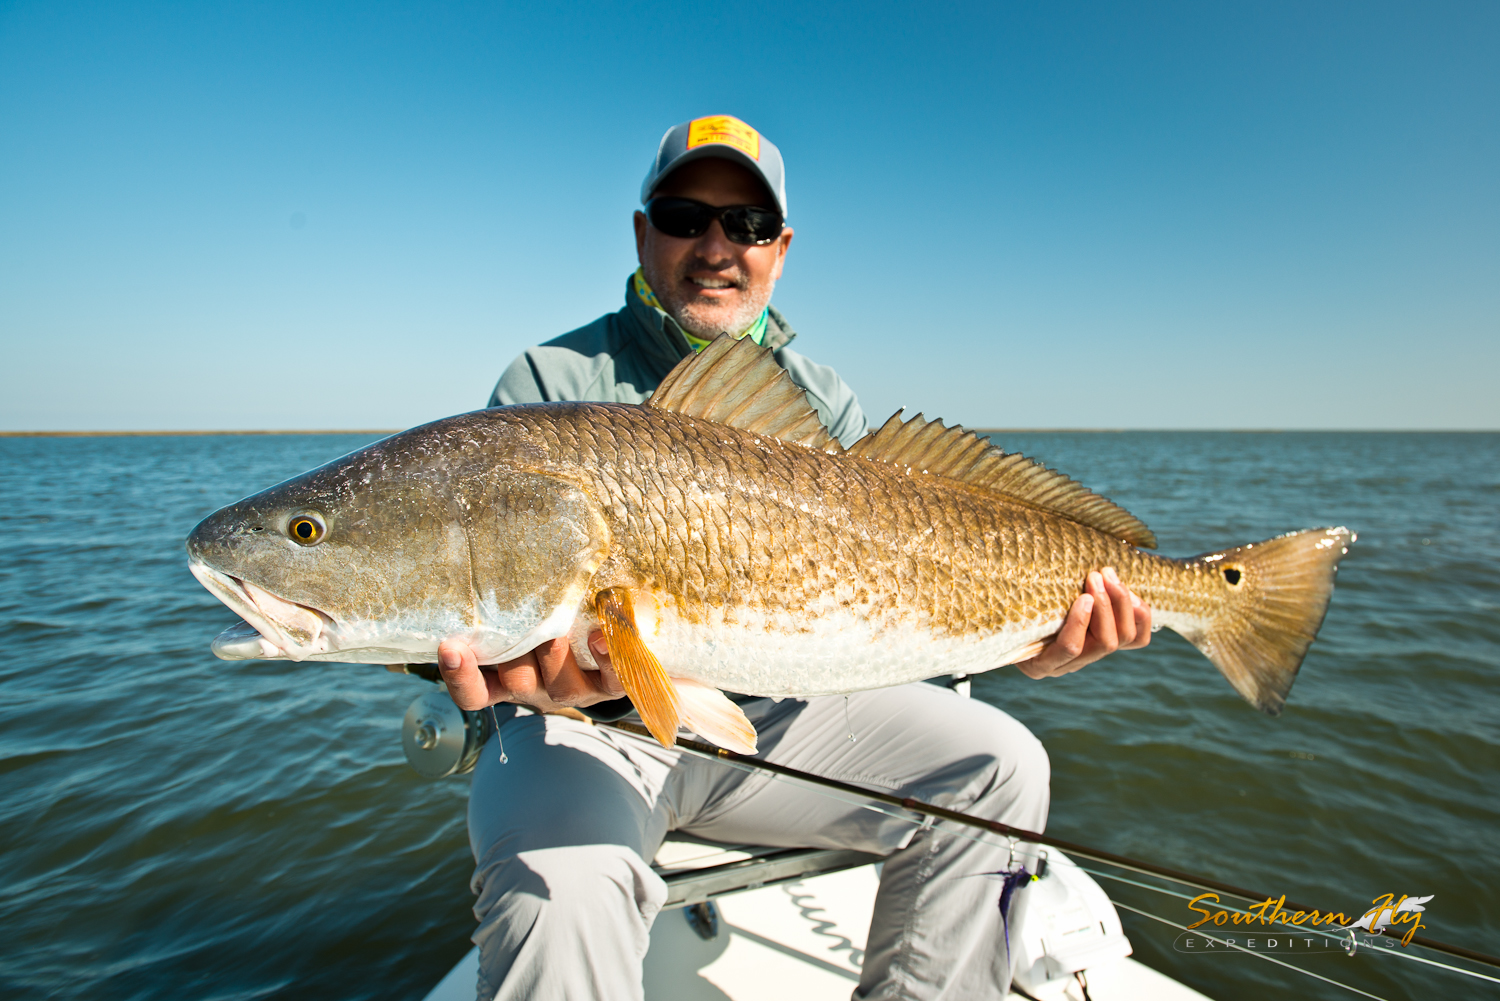 Light Tackle Catch and Release Fly Fishing Guide Redfish Southern Fly Expeditions